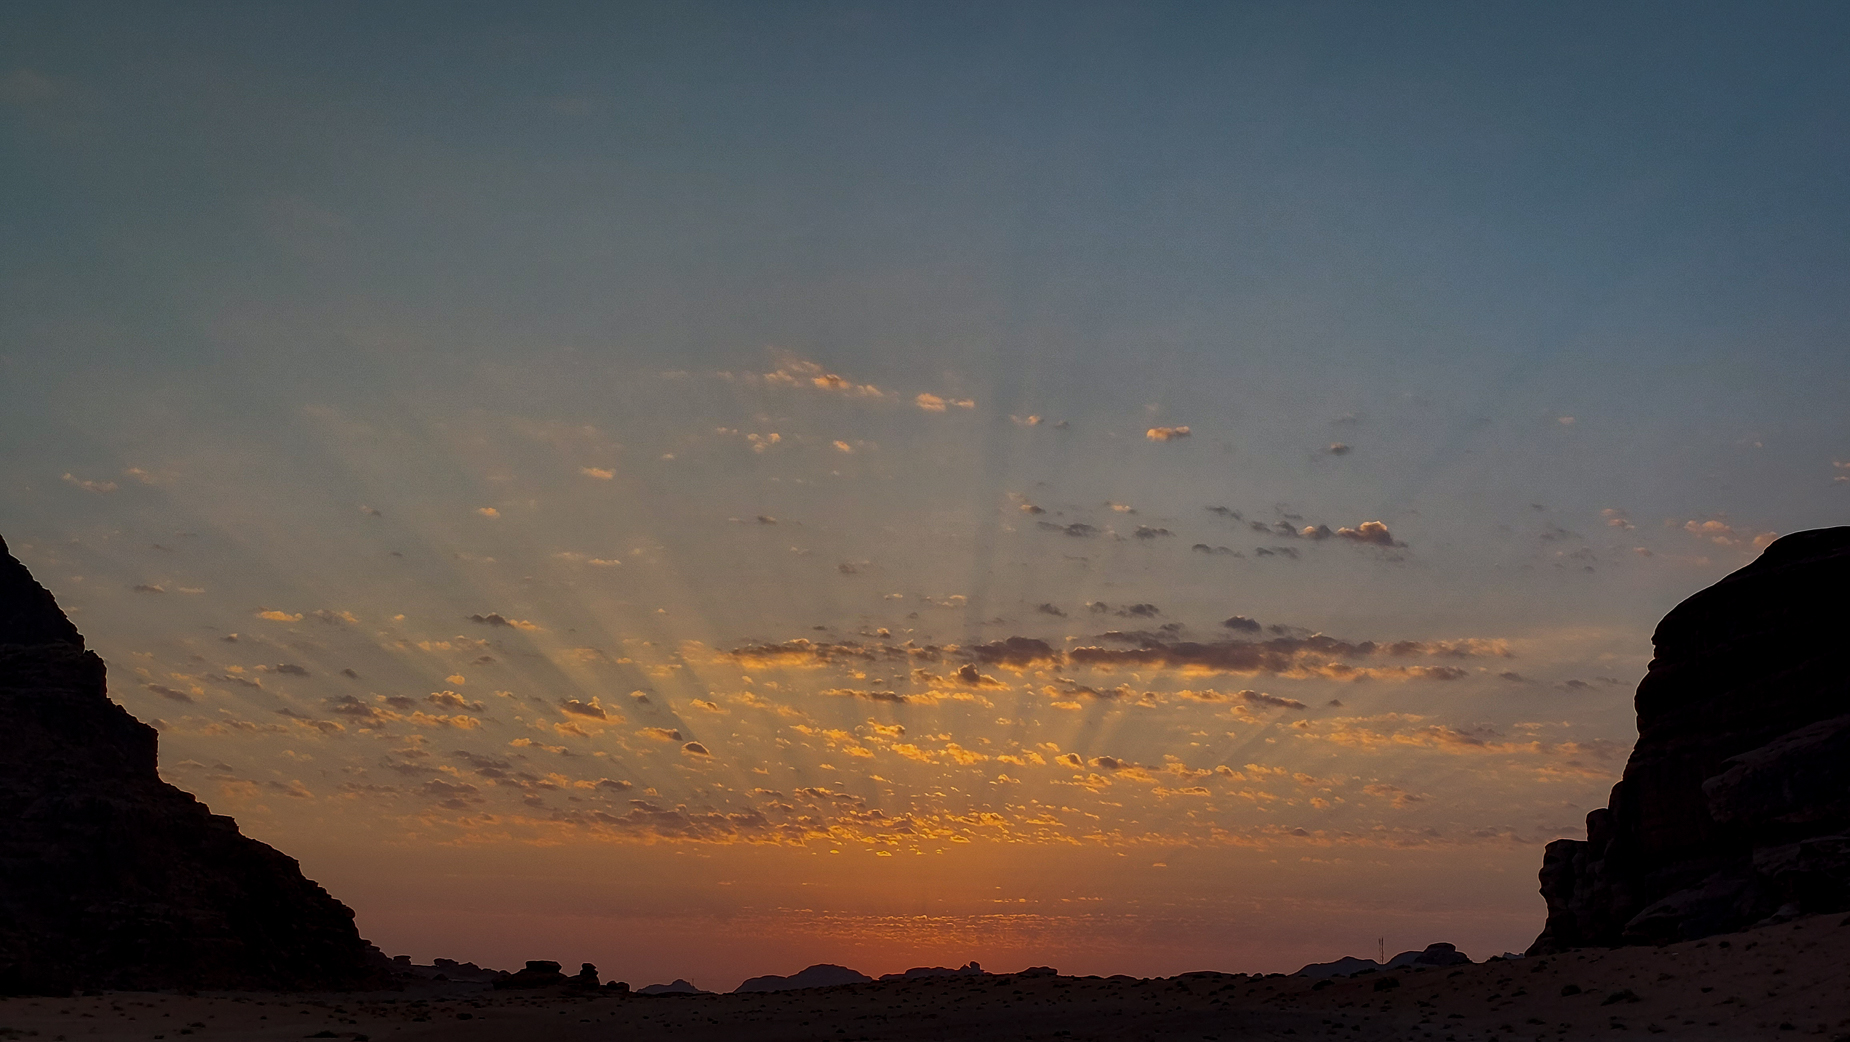 <span  class="uc_style_uc_tiles_grid_image_elementor_uc_items_attribute_title" style="color:#ffffff;">sunrise in the desert</span>